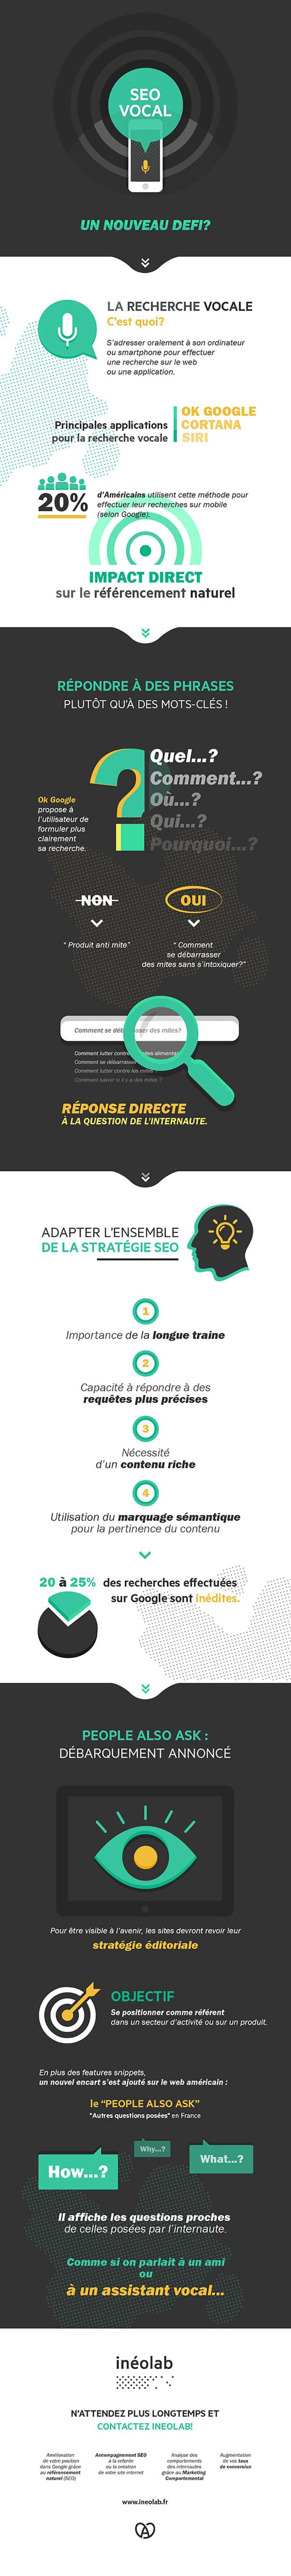 source infographie : <a href="https://www.ineolab.fr/blog/seo-recherche-vocale-search-infographie/">Ineolab</a>